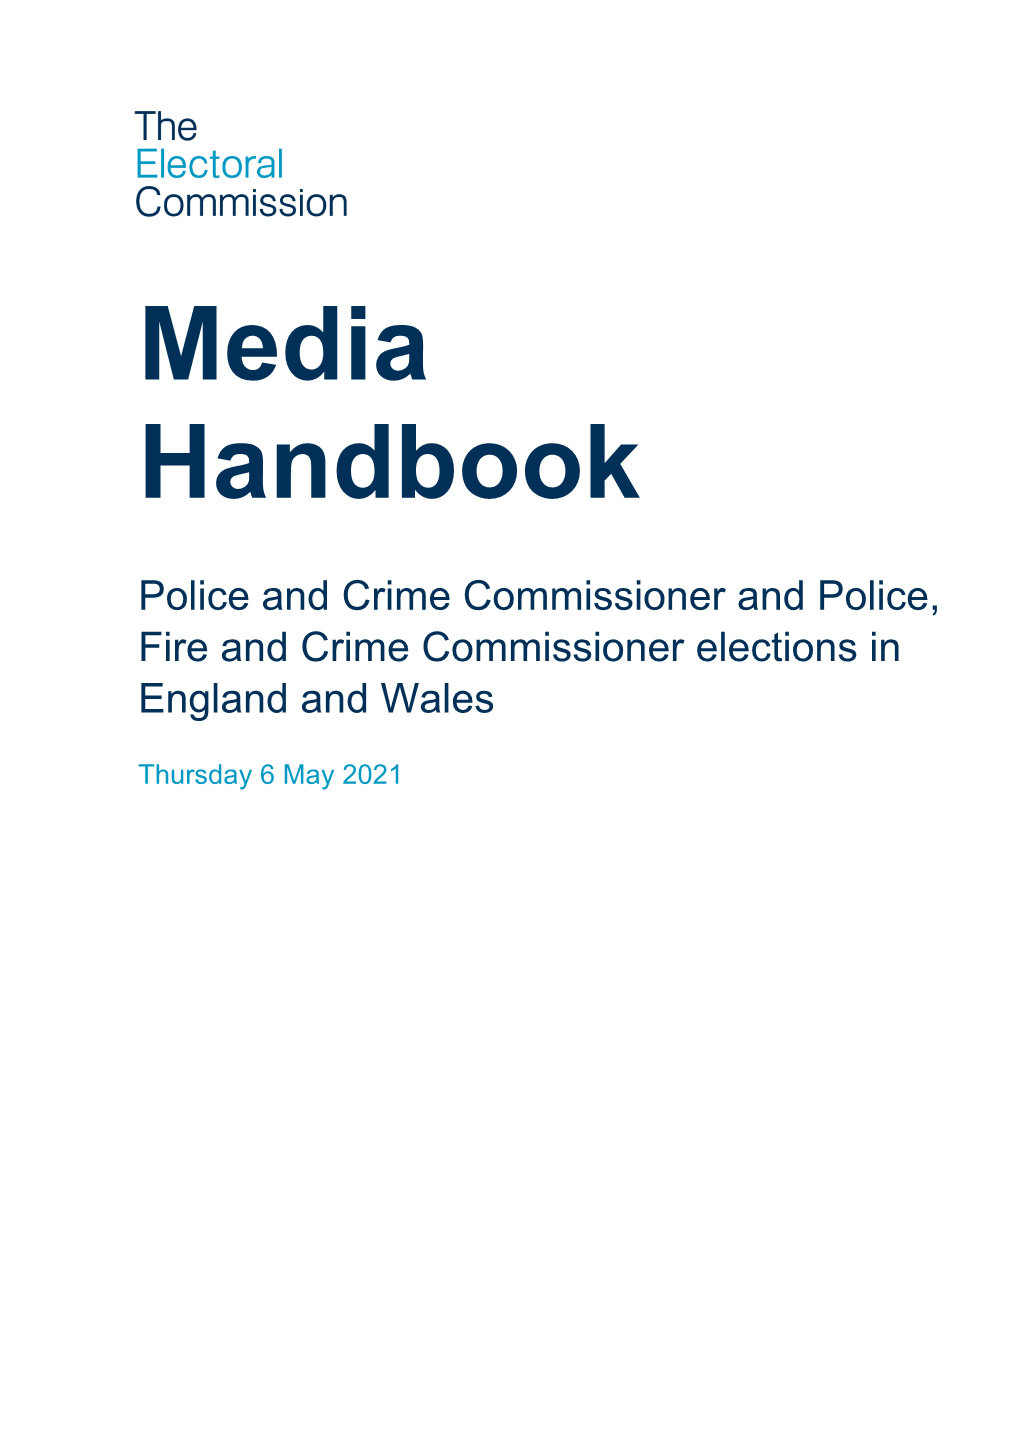 Media Handbook for PCC Elections in England